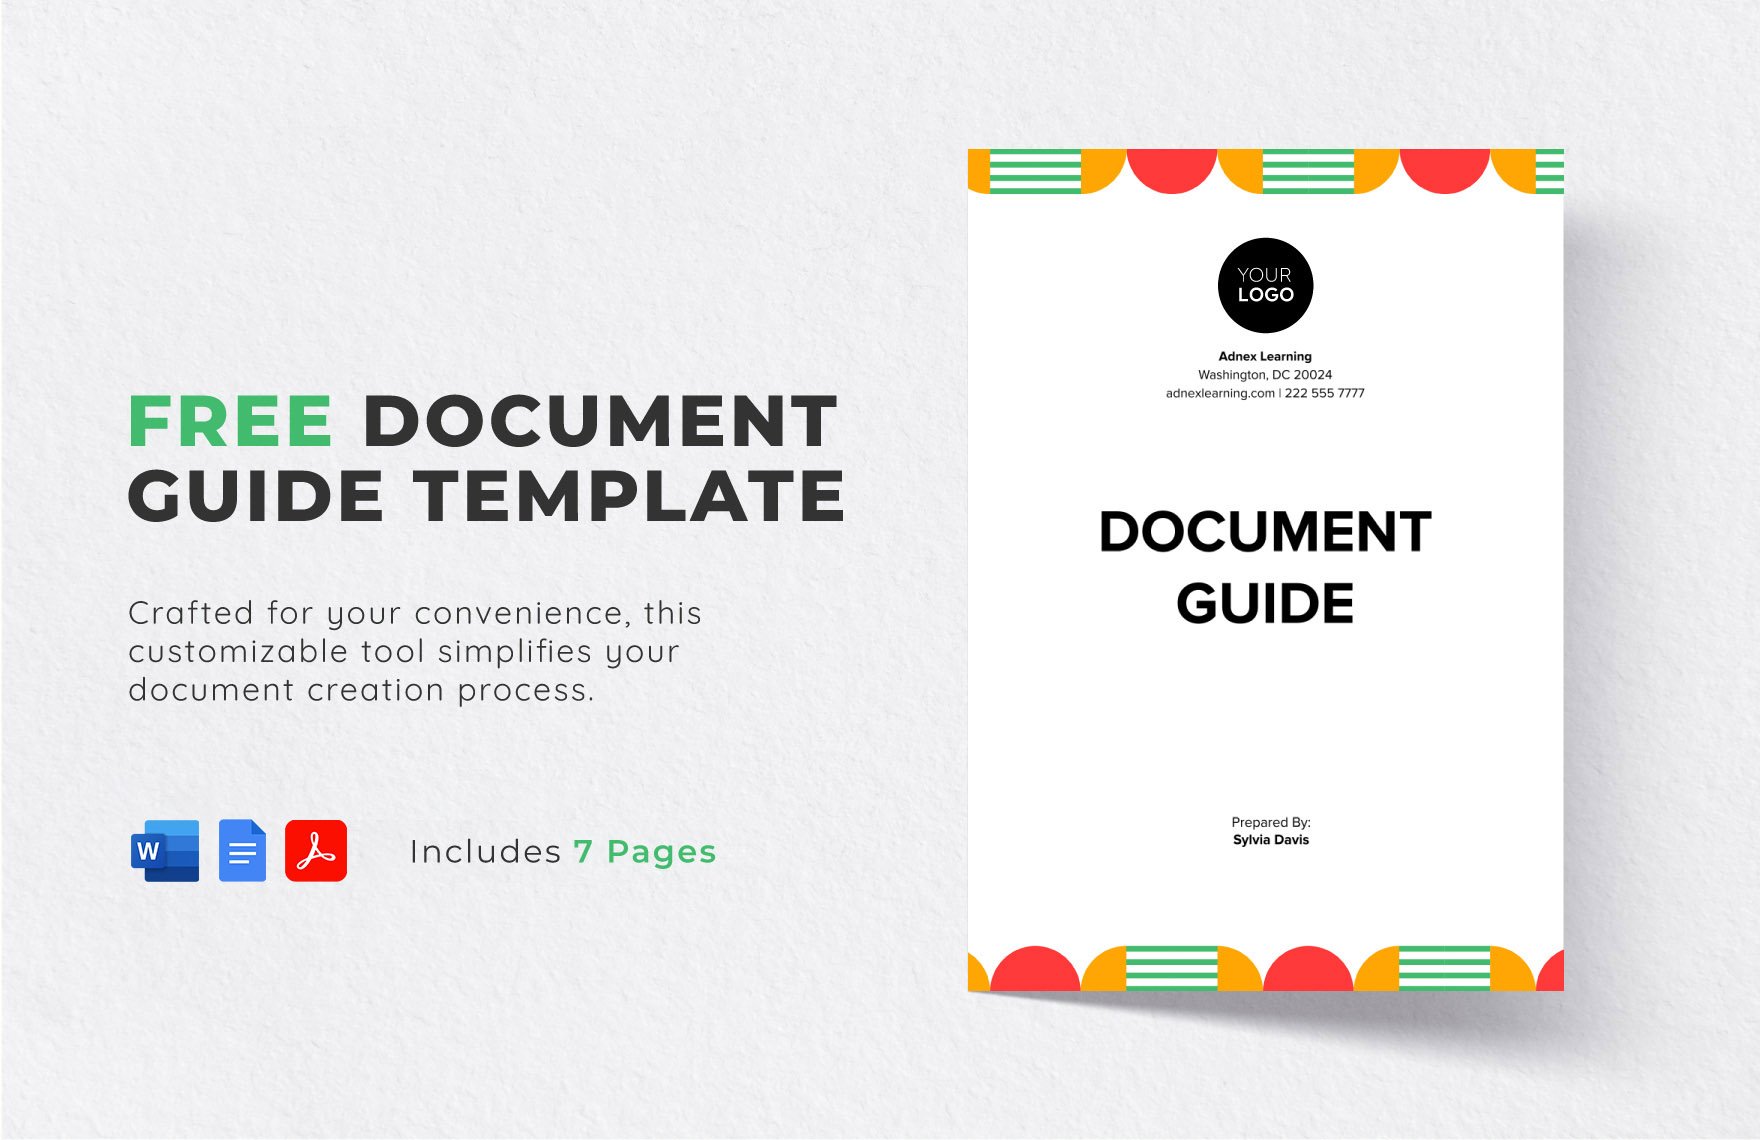 Document Guide Template